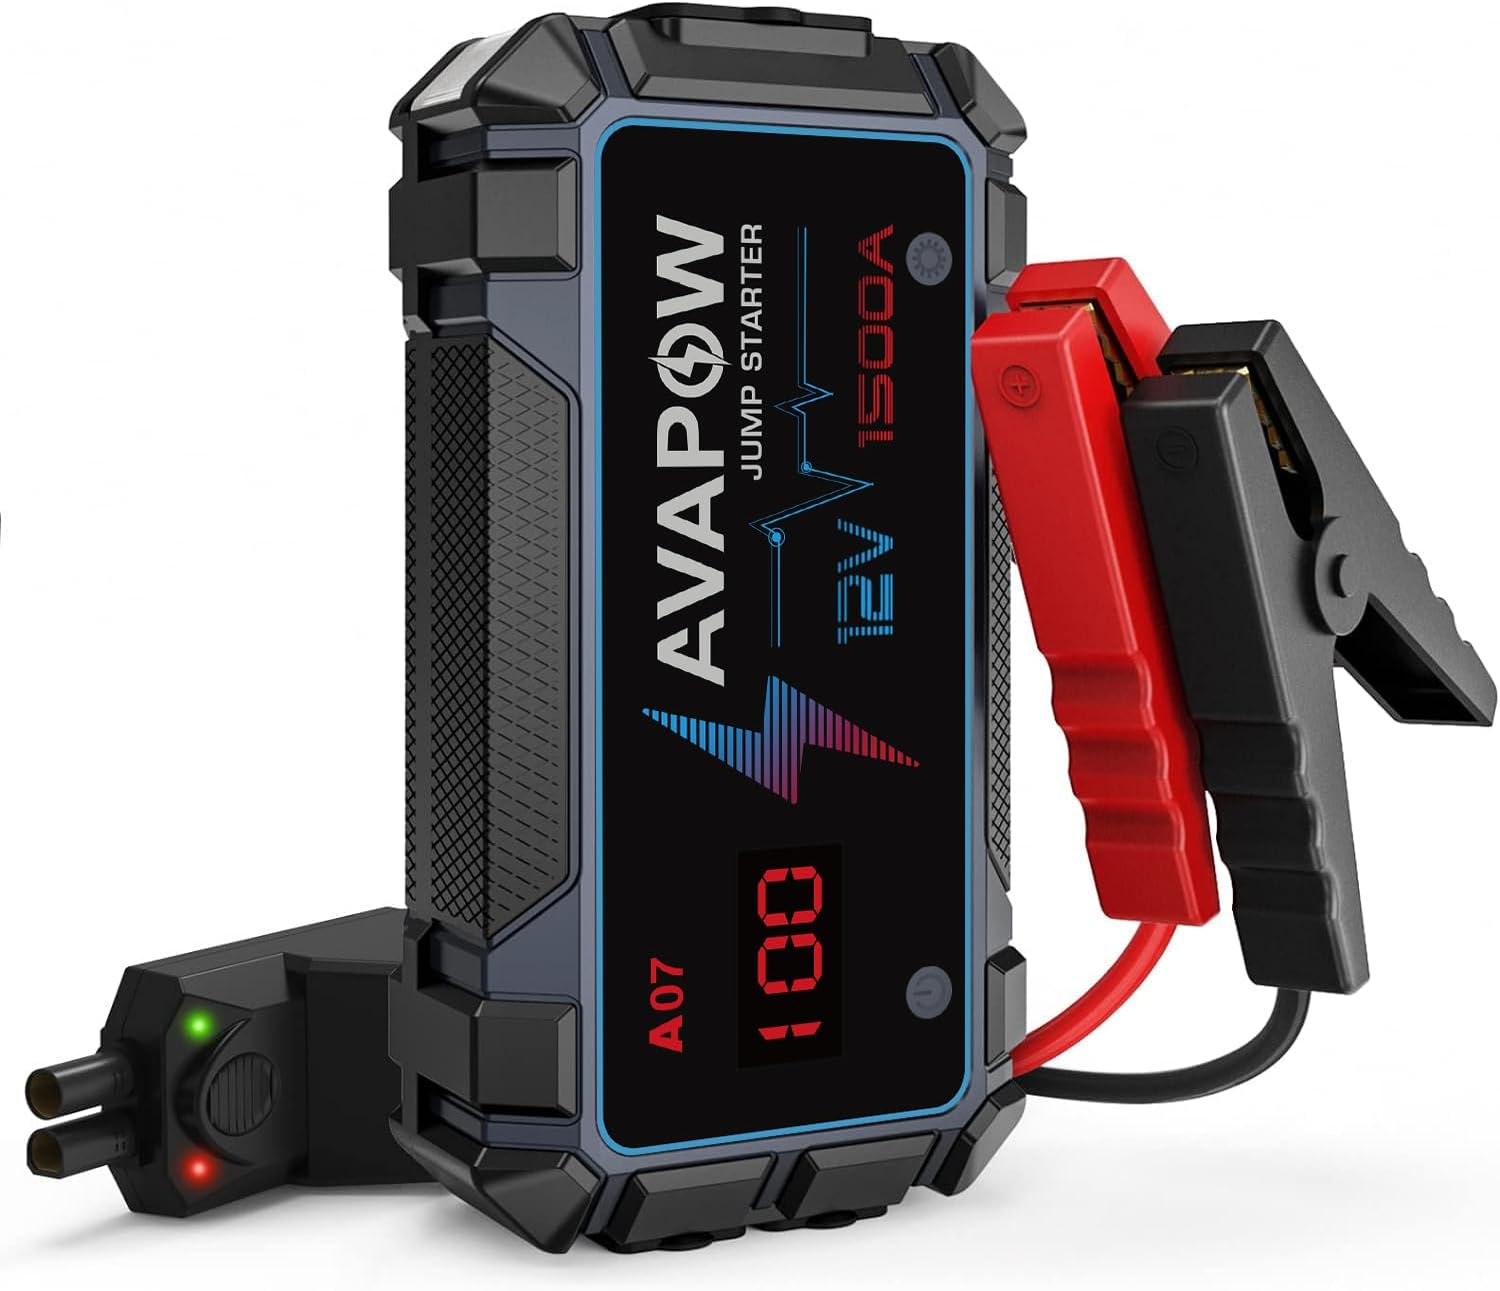 Prime Members: AVAPOW 1500A 12800mAh 12V Portable Car Battery Jump Starter  (up to 7L Gas/5.5L Diesel Engine) $30 + Free Shipping